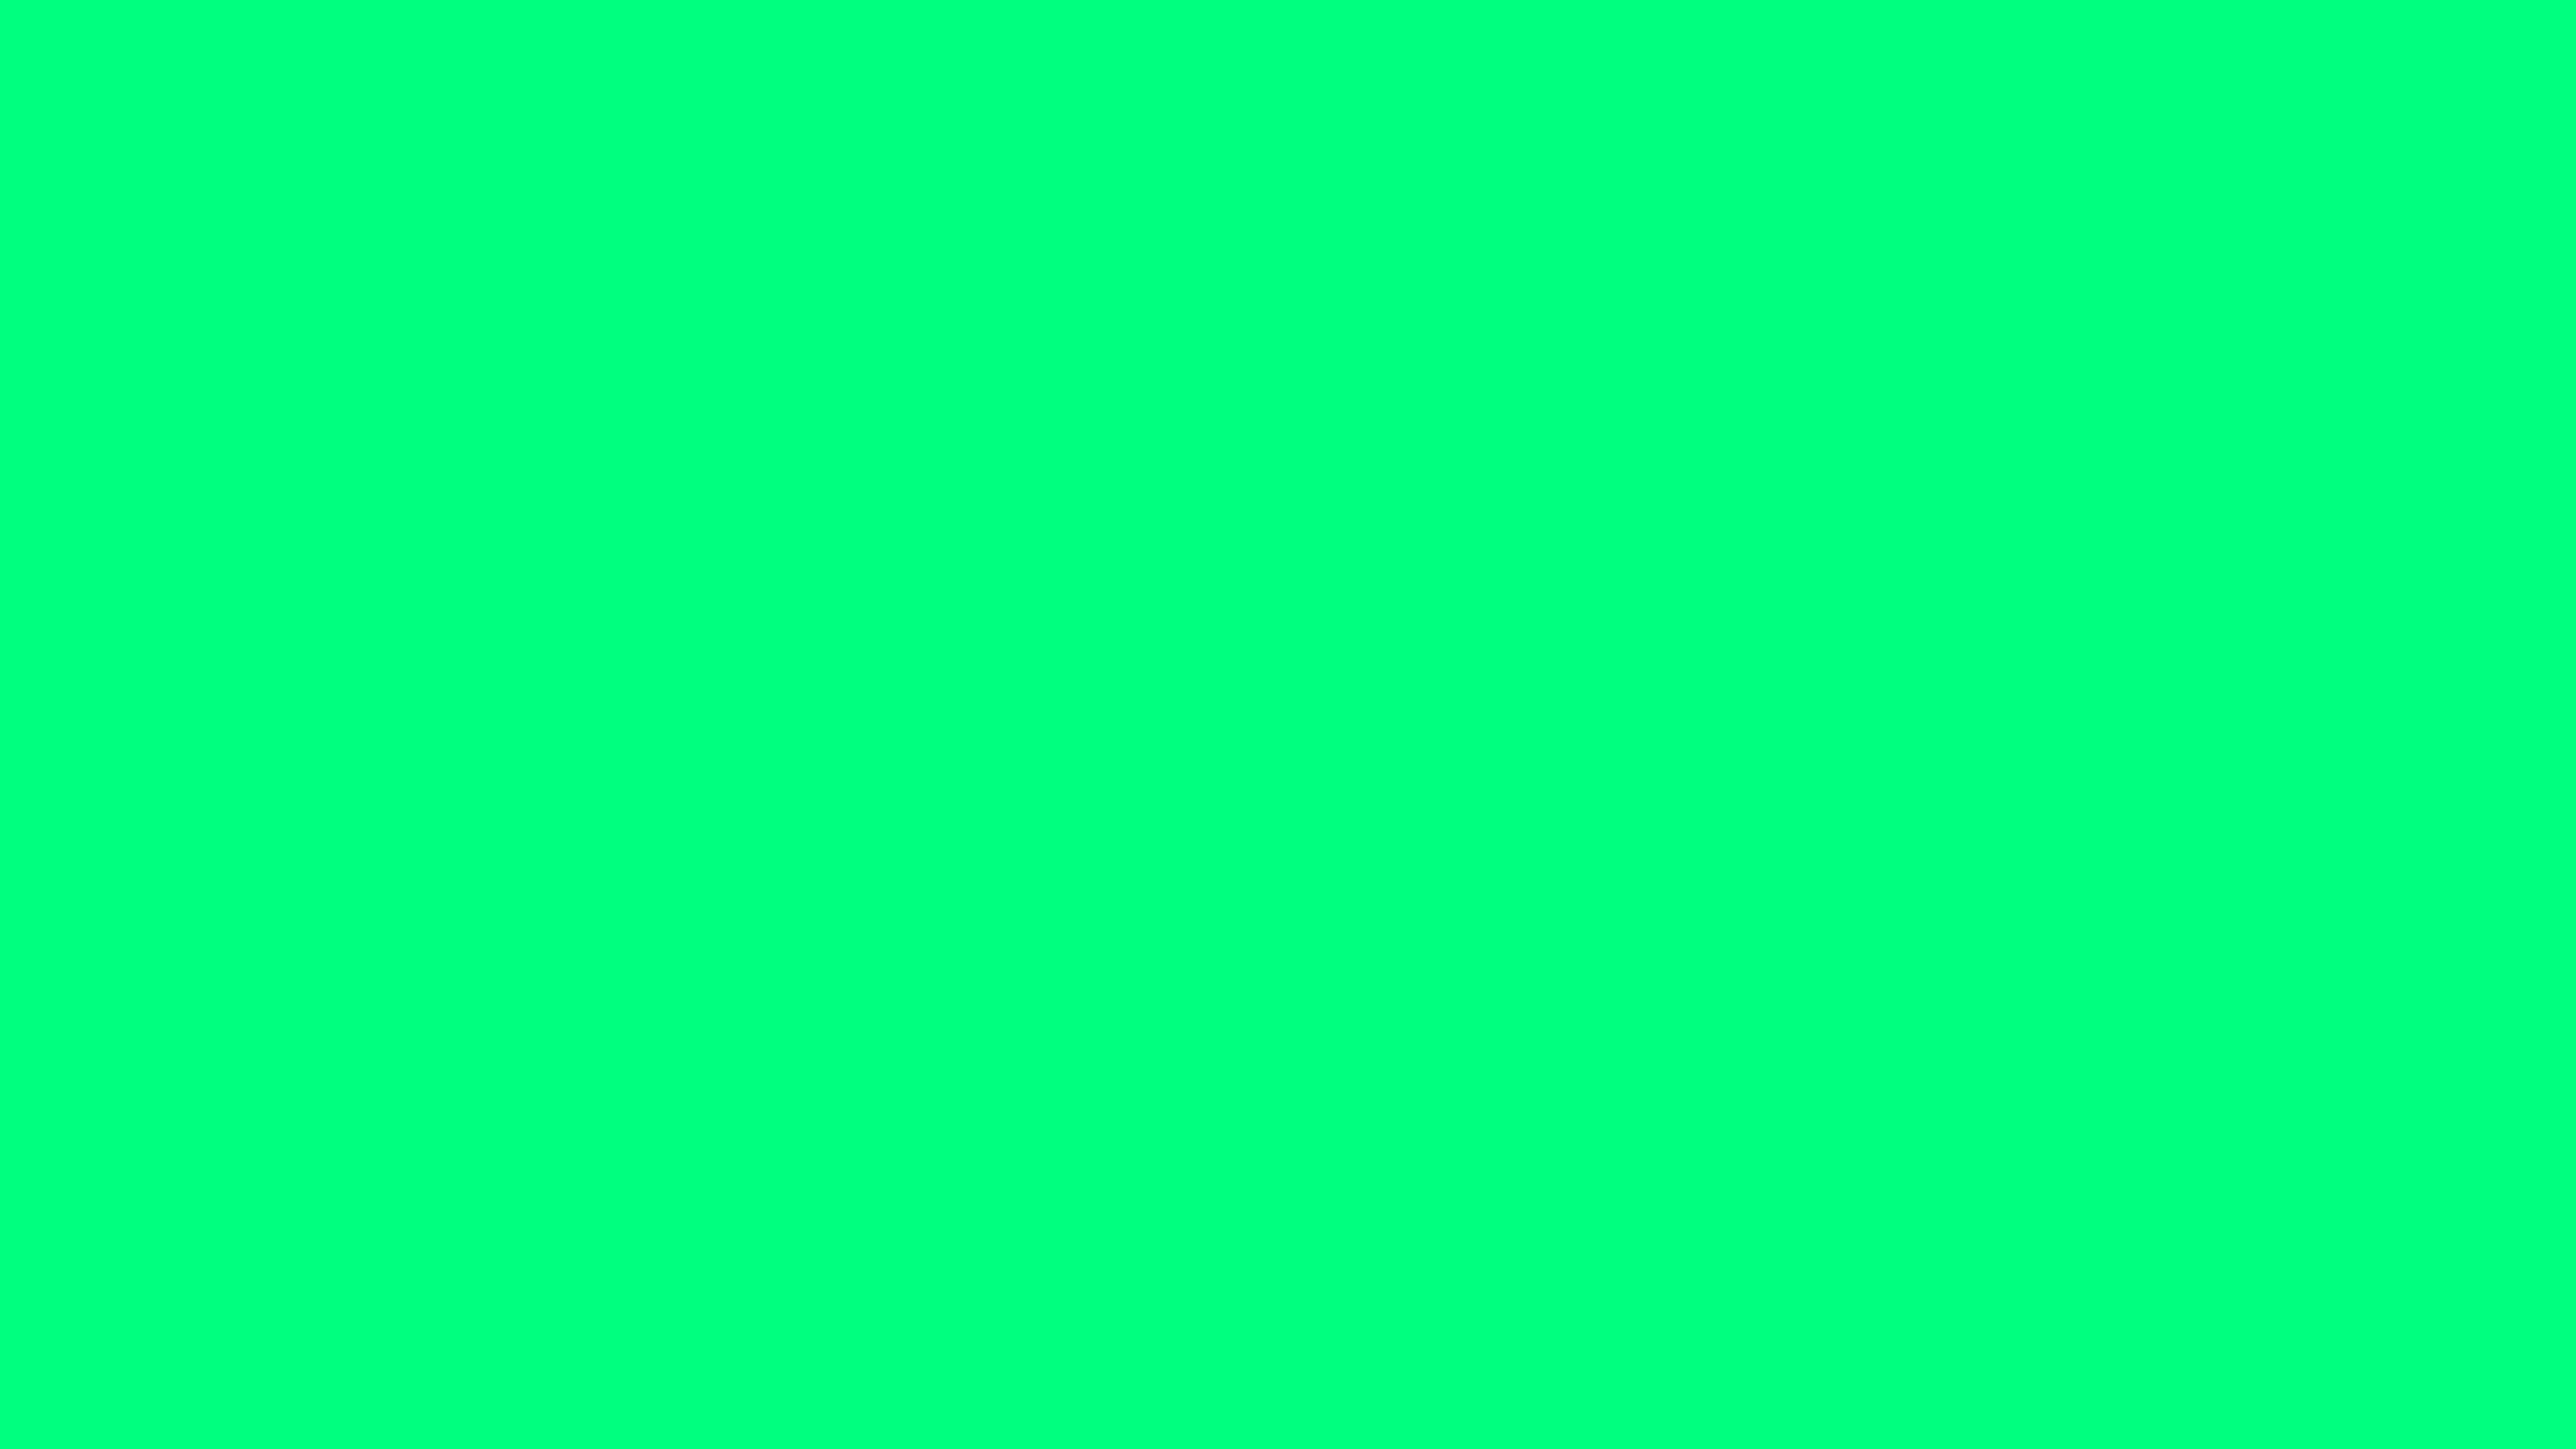 7680x4320 Guppie Green Solid Color Background